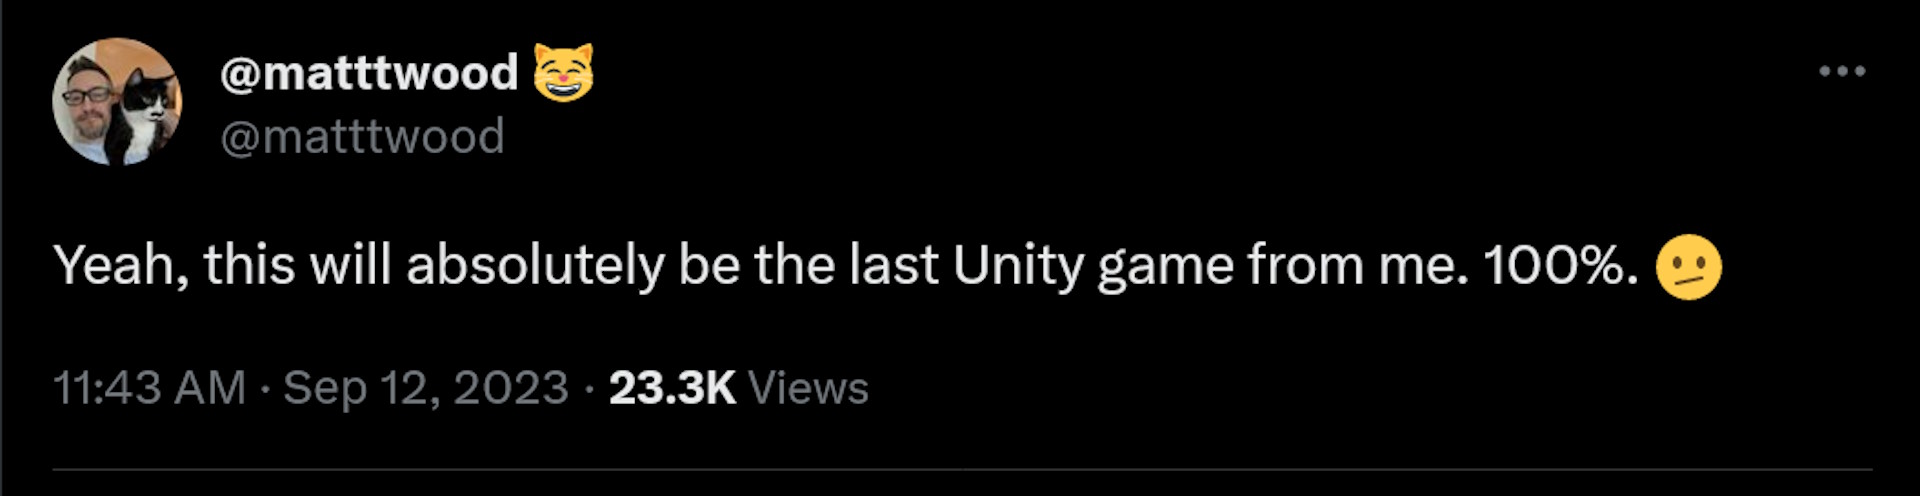 Yeah, this will absolutely be the last Unity game from me. 100%. ????